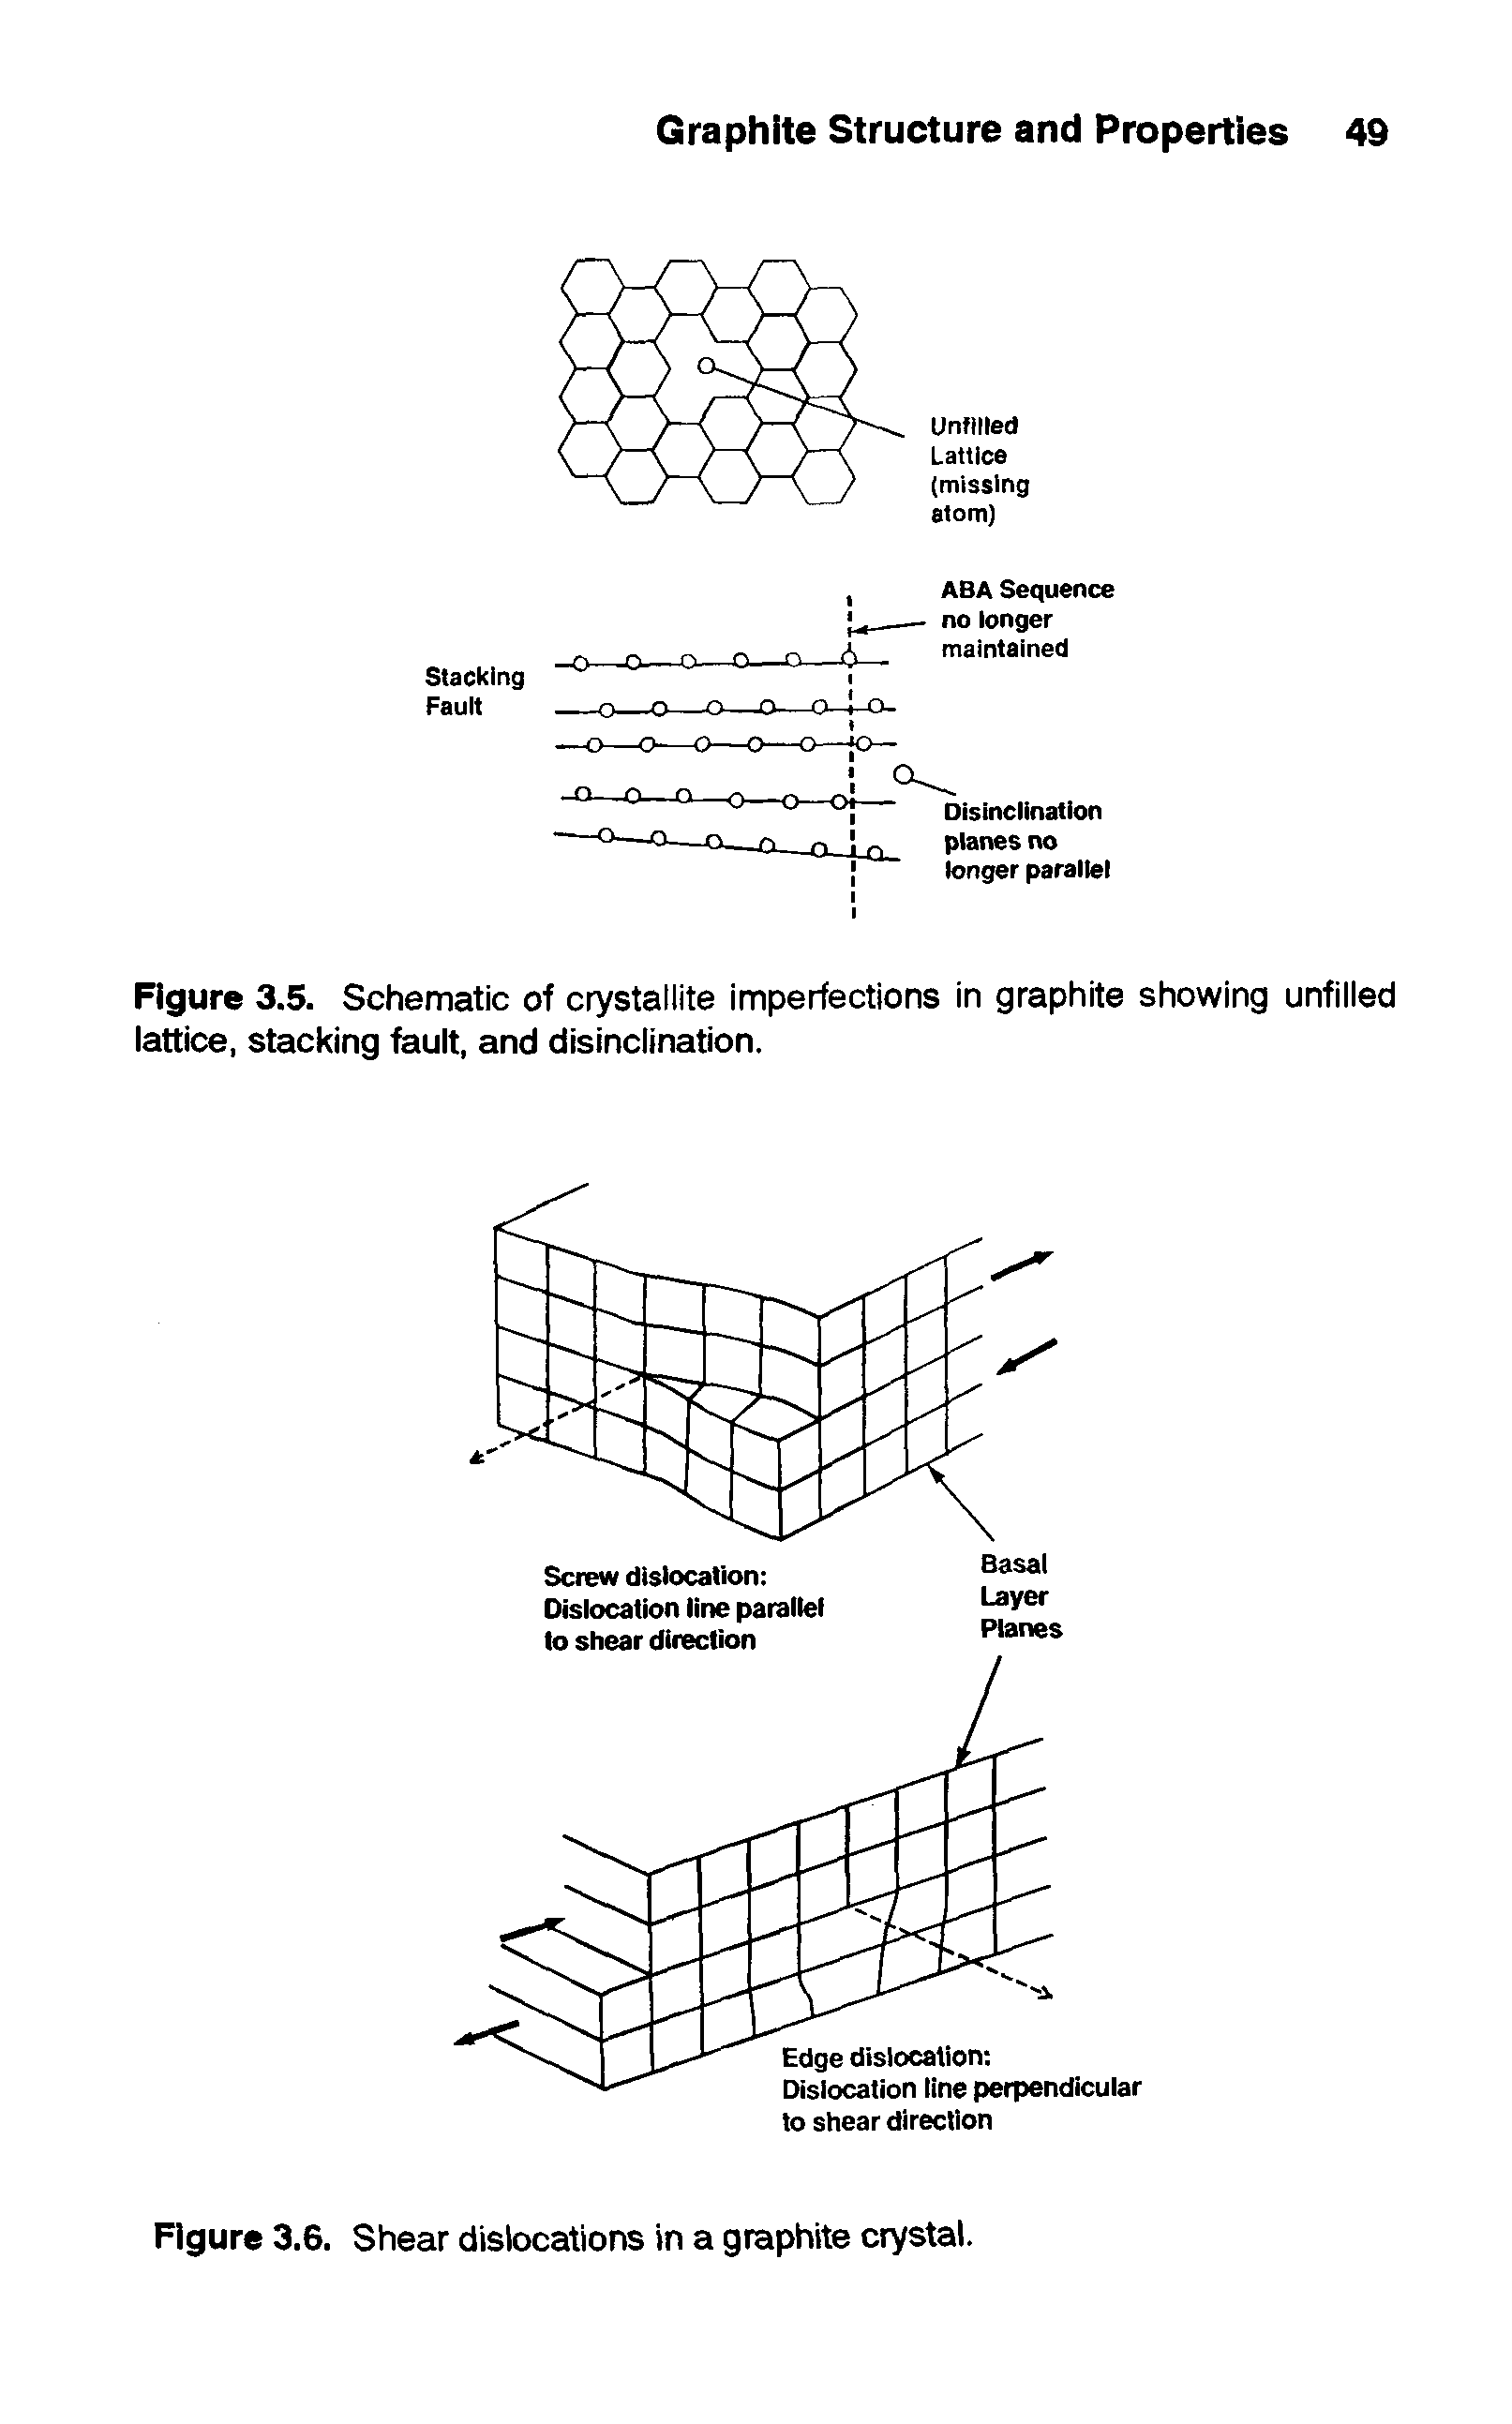 Figure 3.5. Schematic of crystallite imperfections in graphite showing unfillecf lattice, stacking fault, and disinclination.